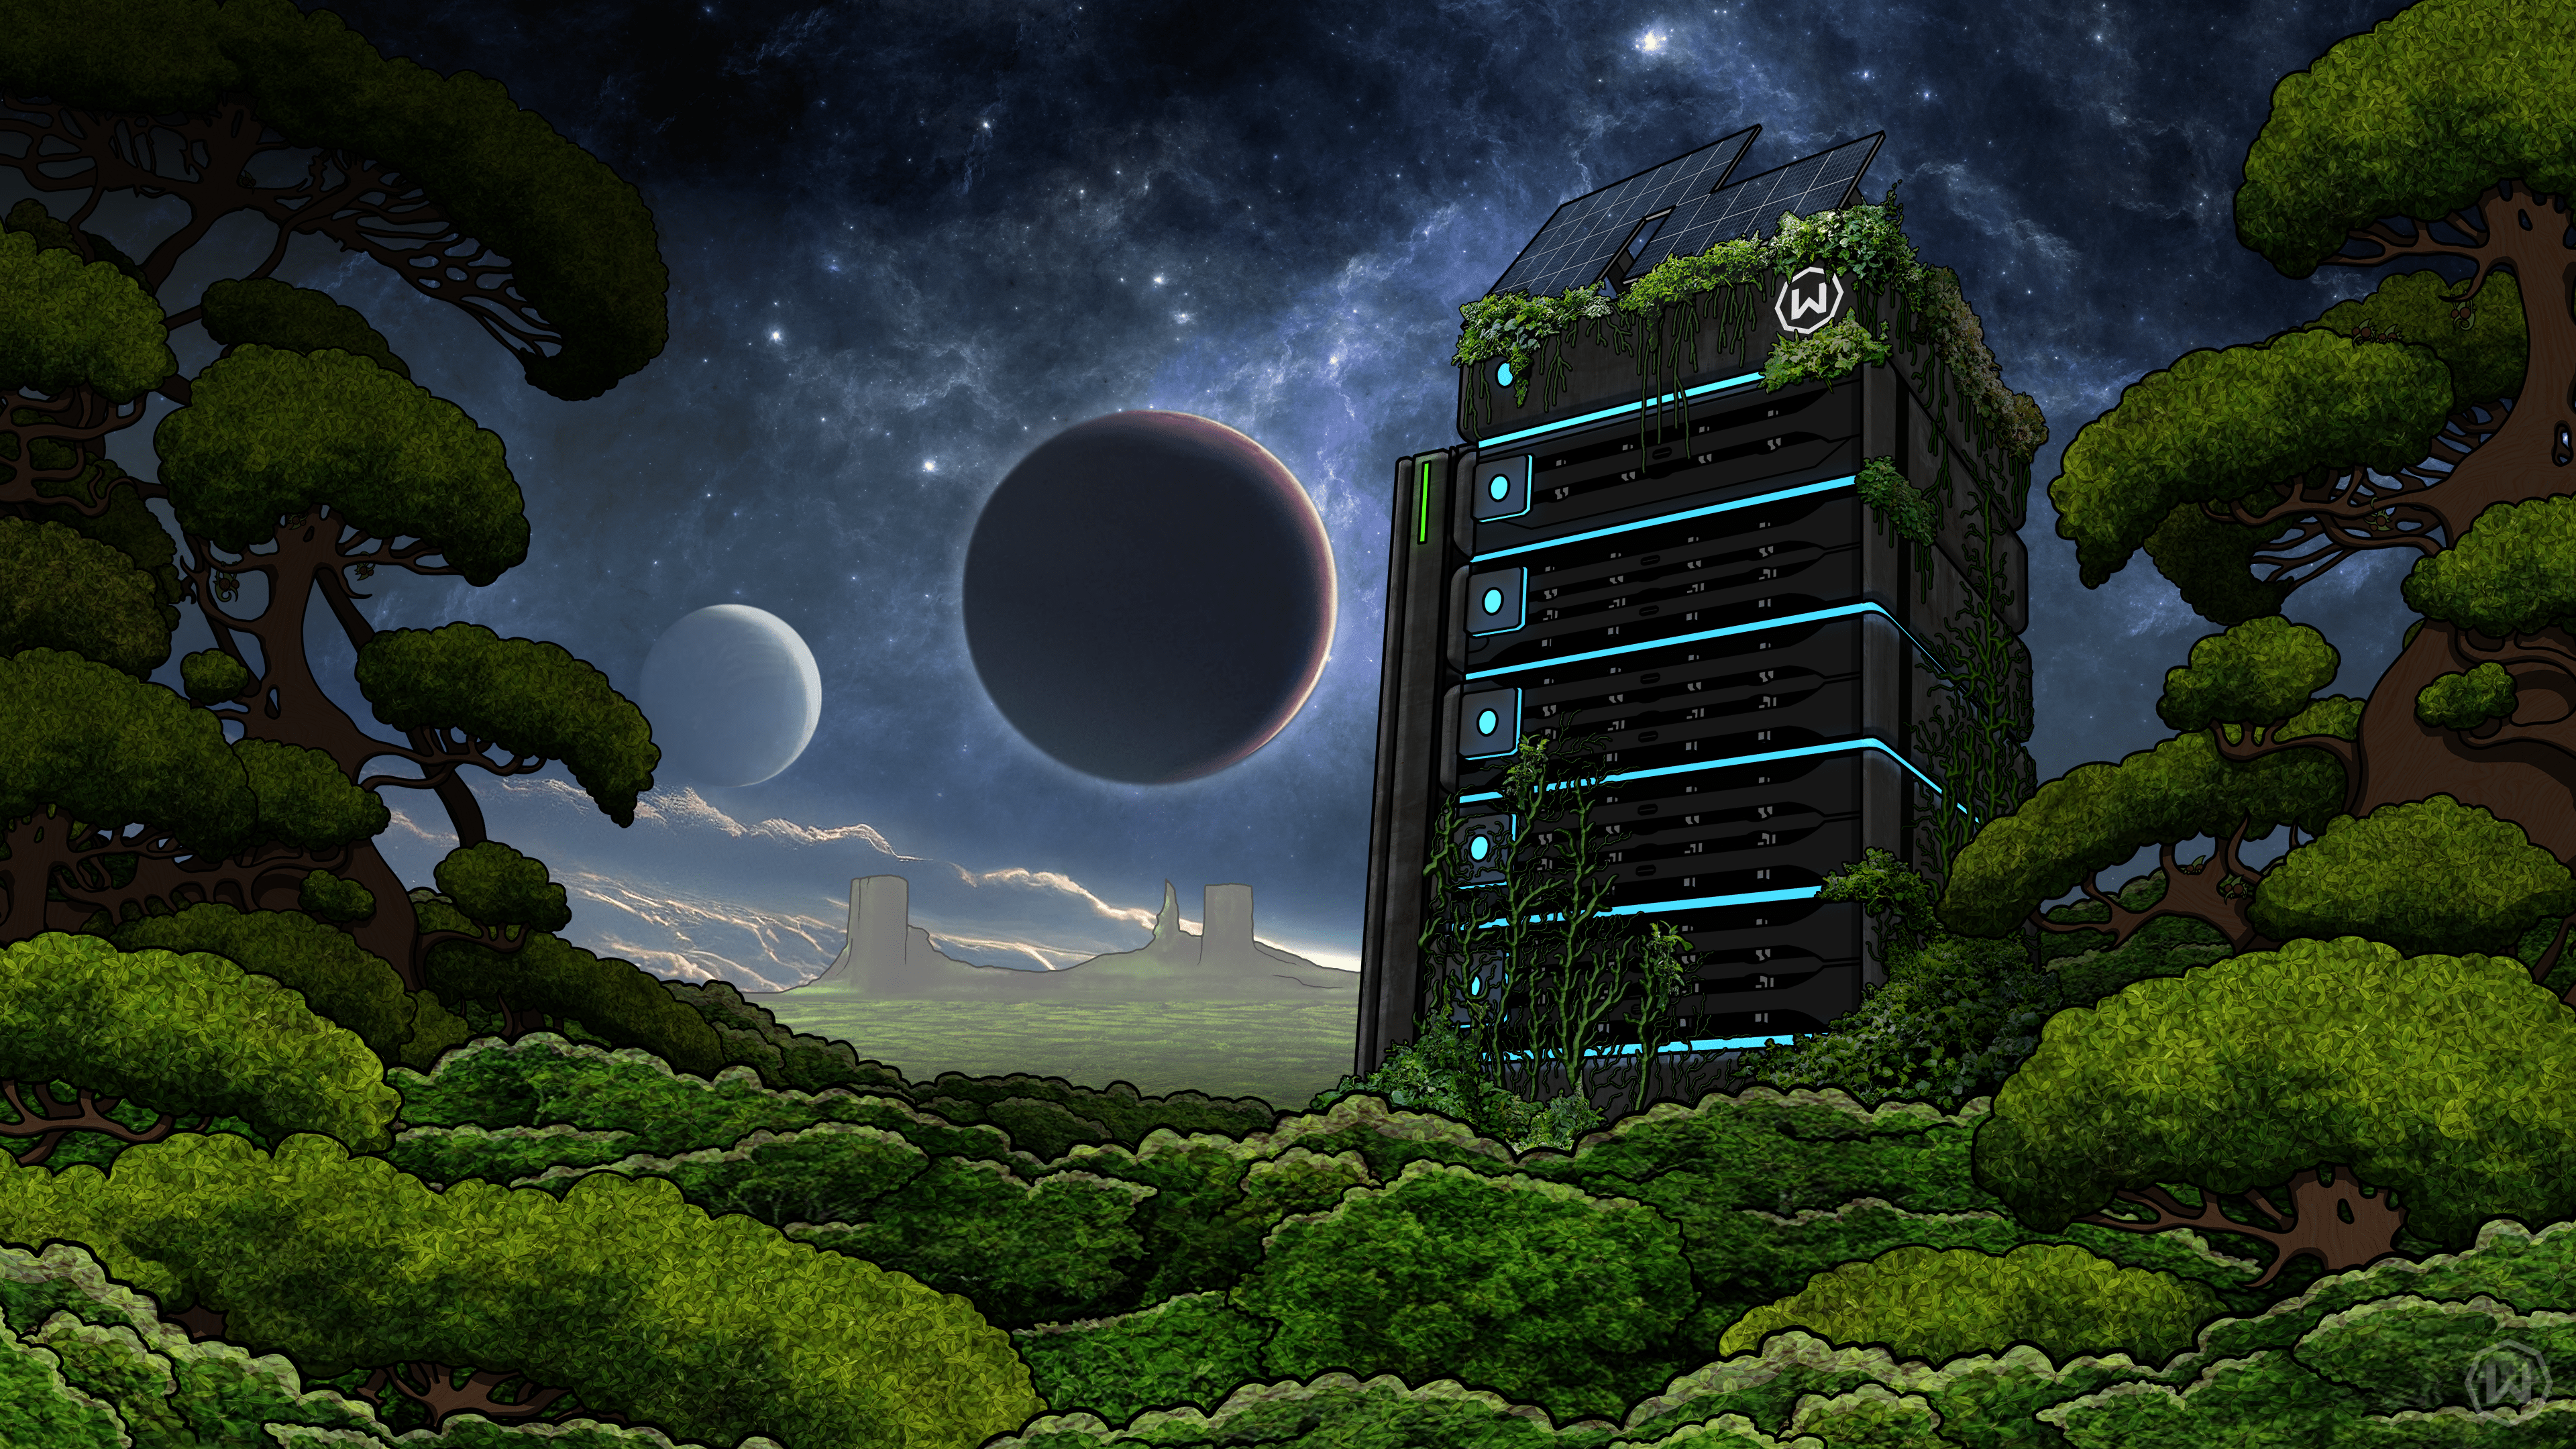 A render of a large data center, covered in plants, with a planet in the background. - Pixel art